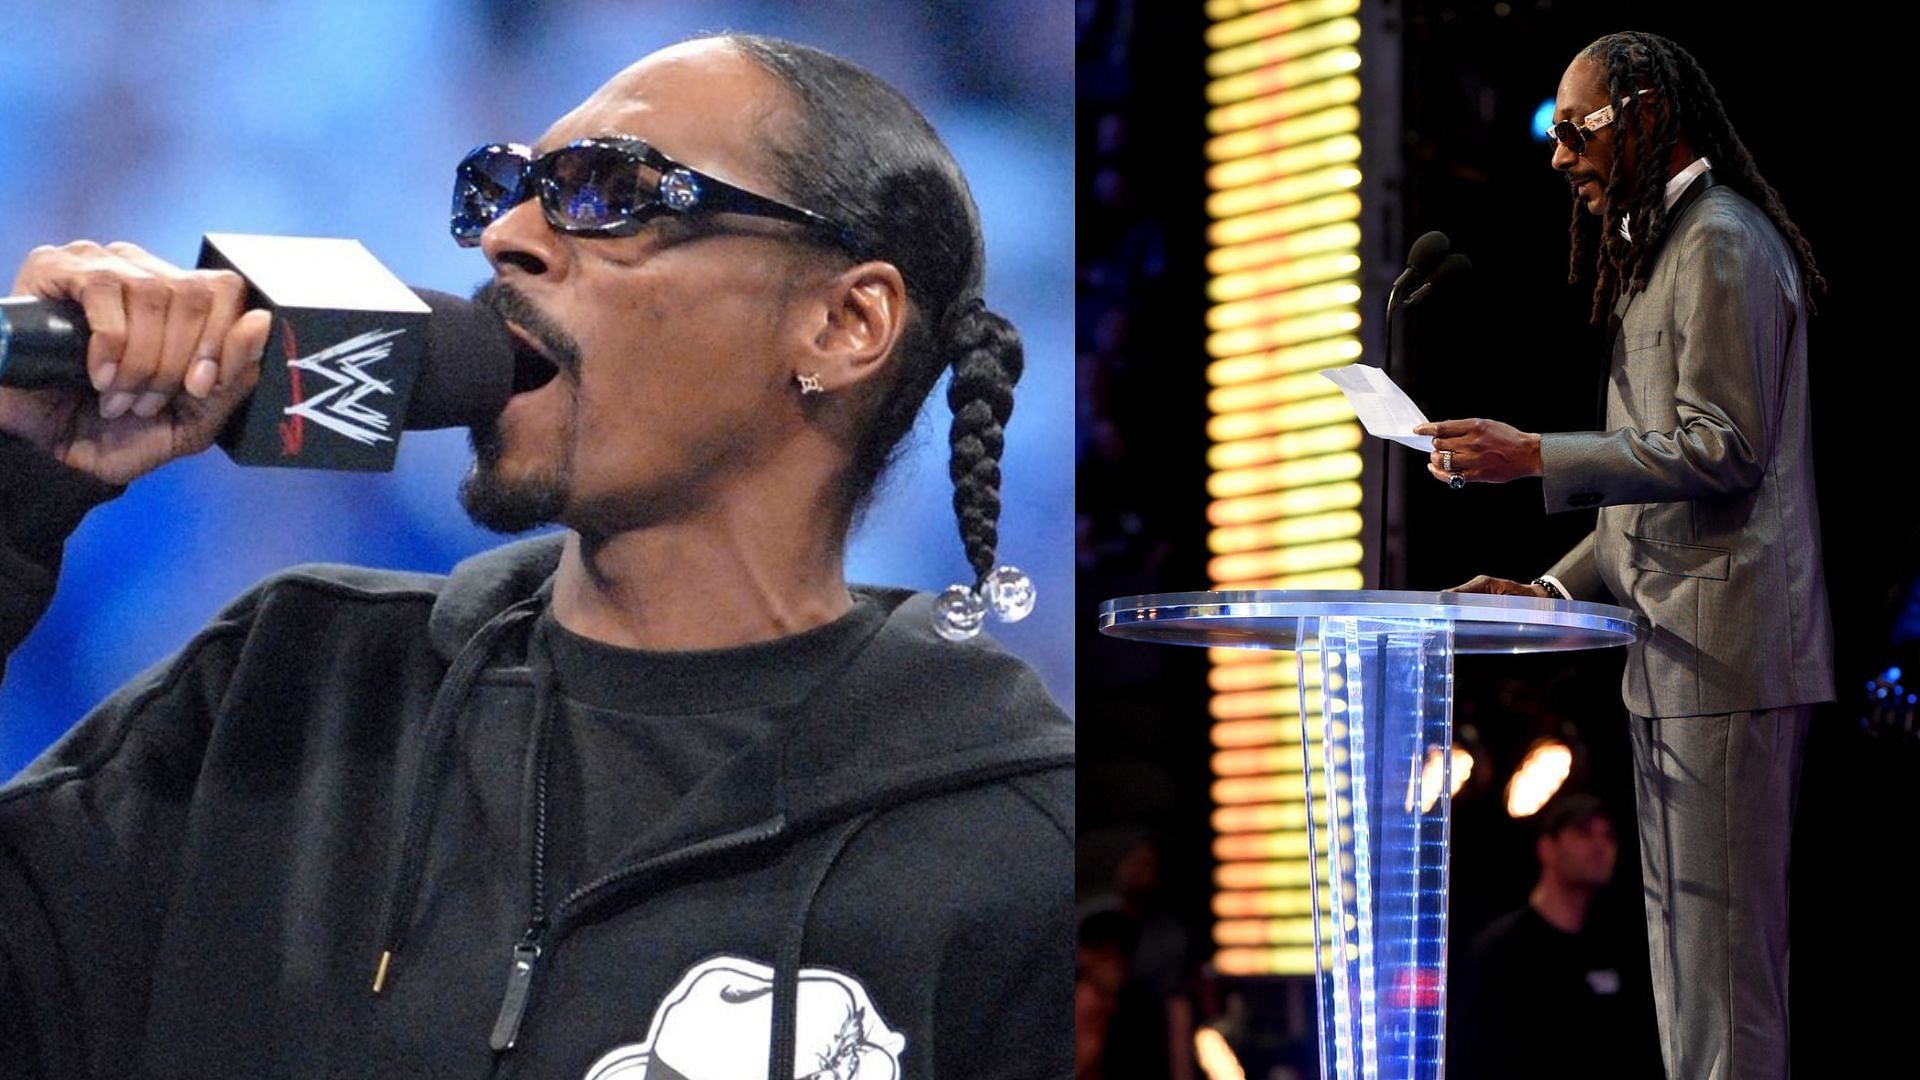 Snoop Dogg has a long history with WWE